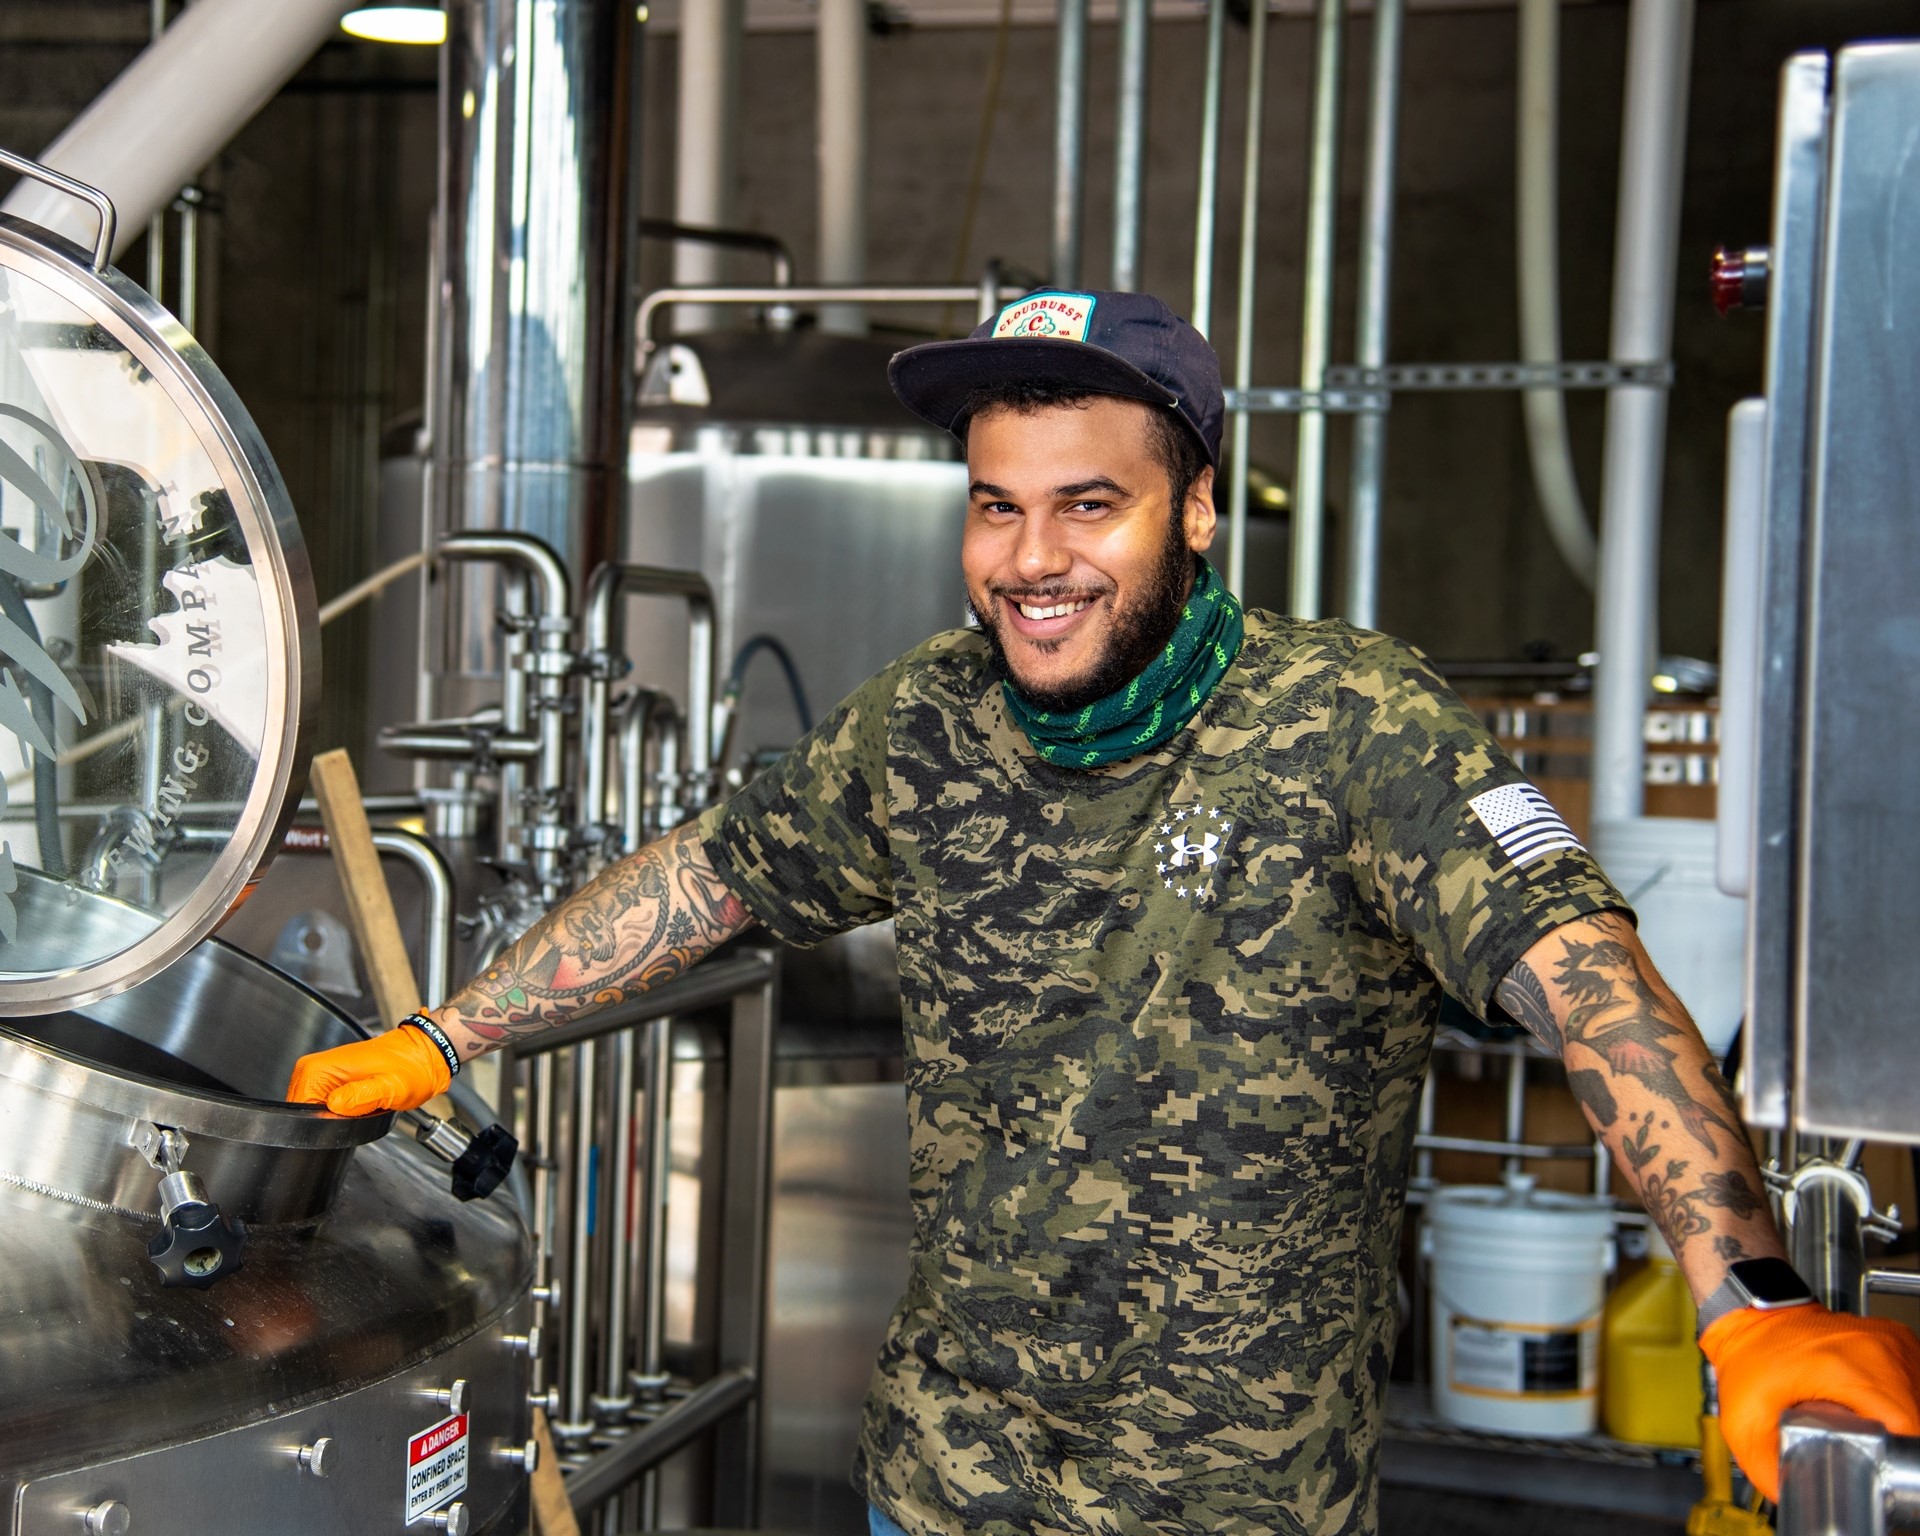 Brewer prepping Alter Brewing Company's Festbier